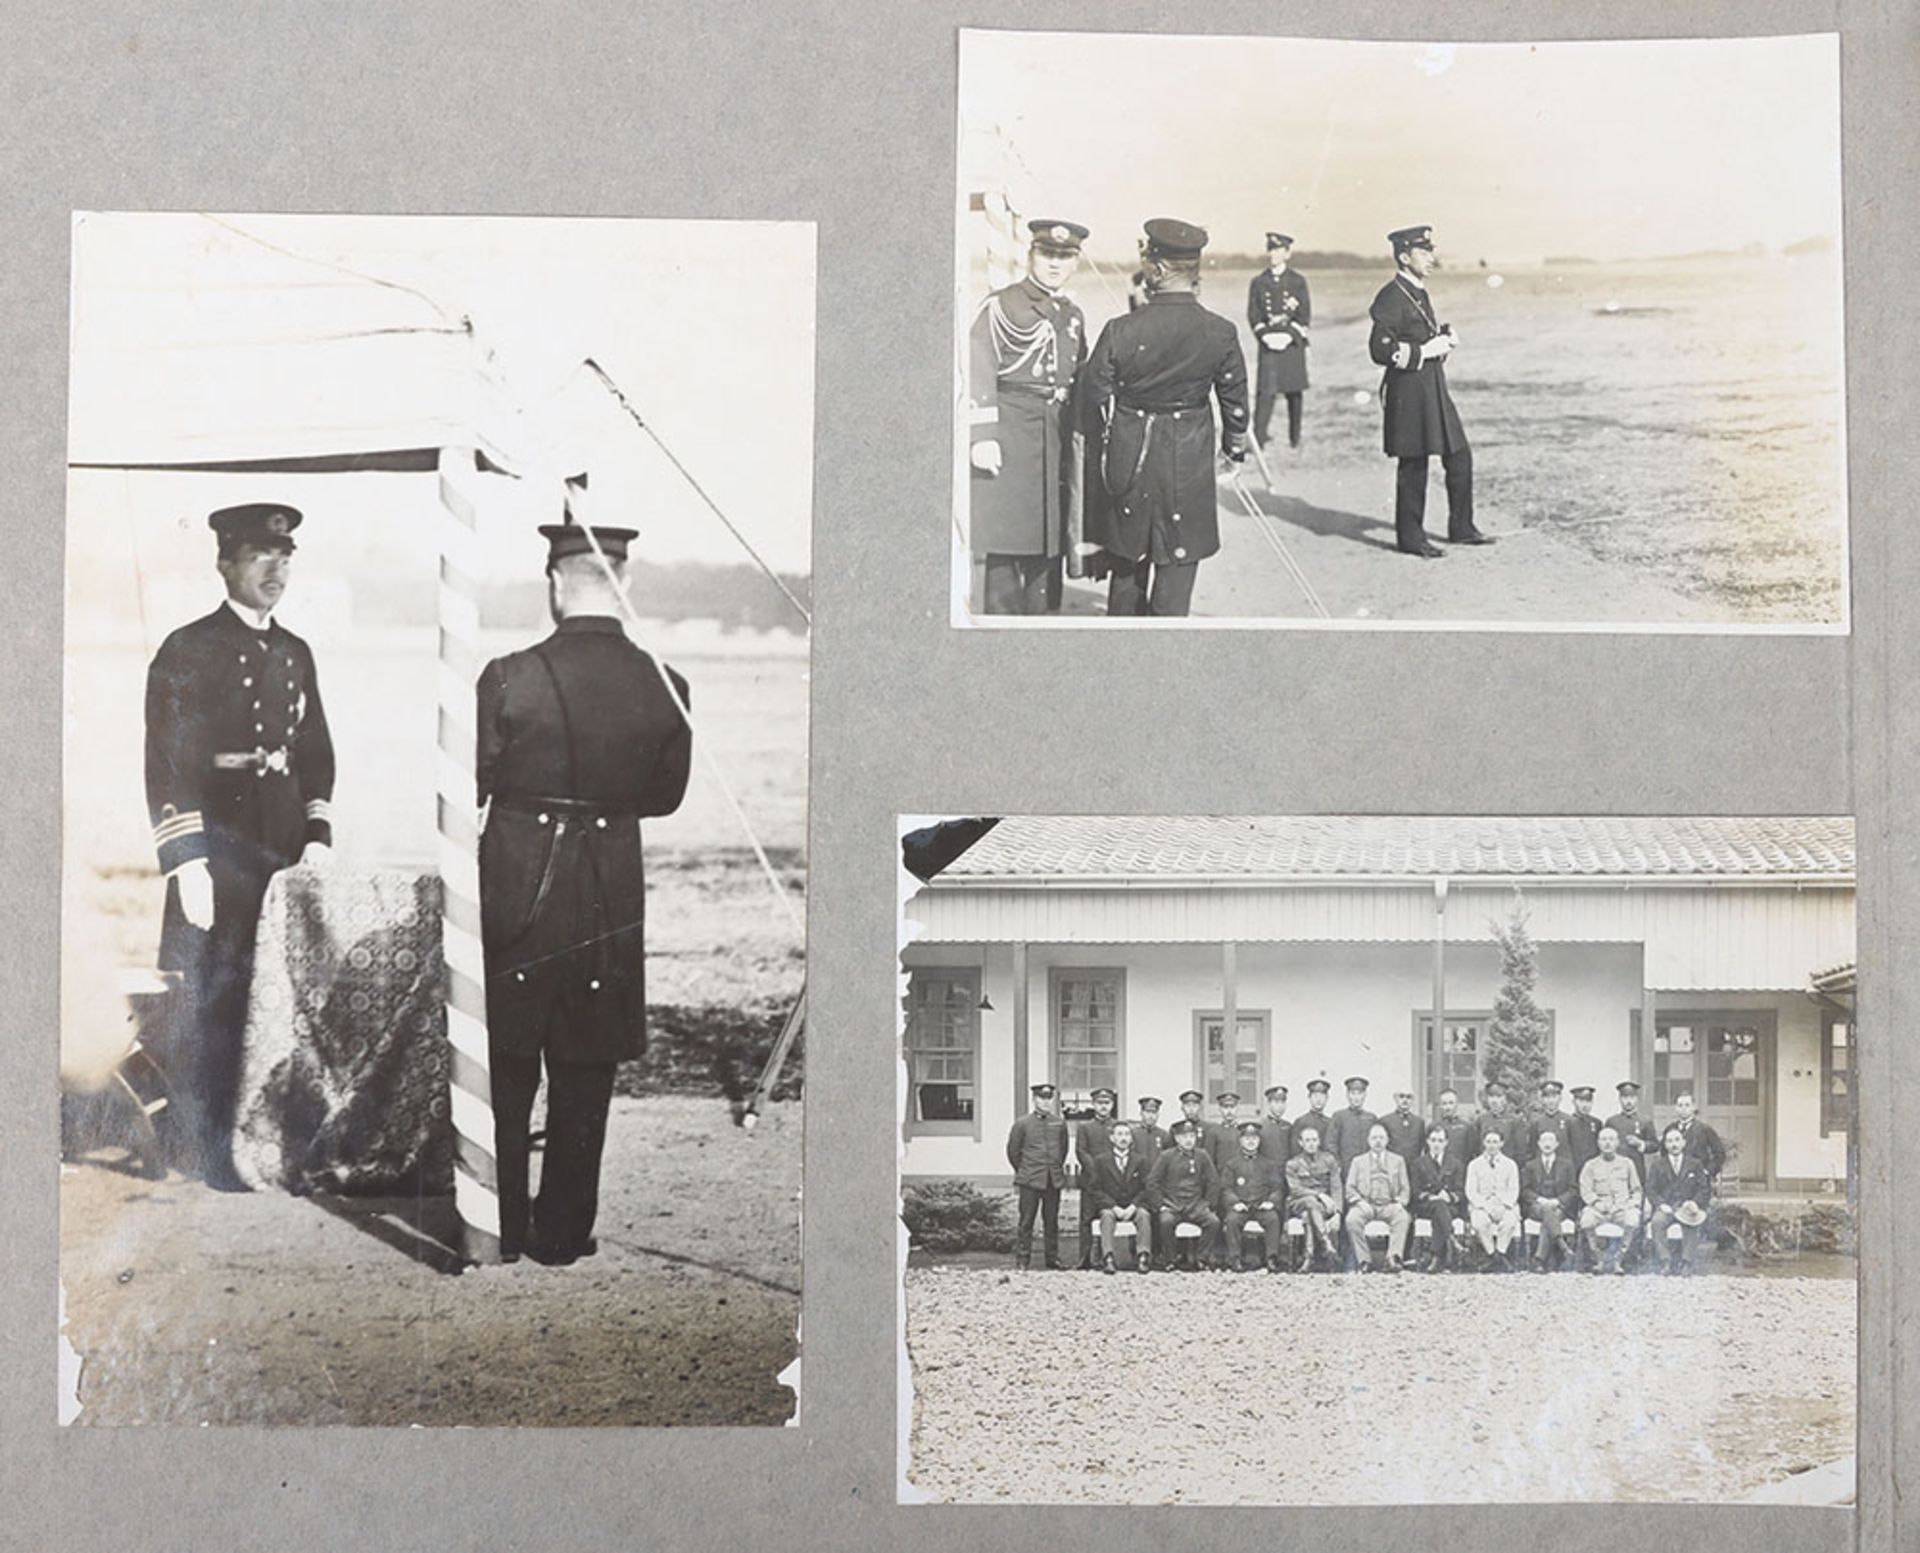 Historically Interesting Photograph Album Compiled by a Member of the Naval Aviation Station at Kasu - Image 25 of 47